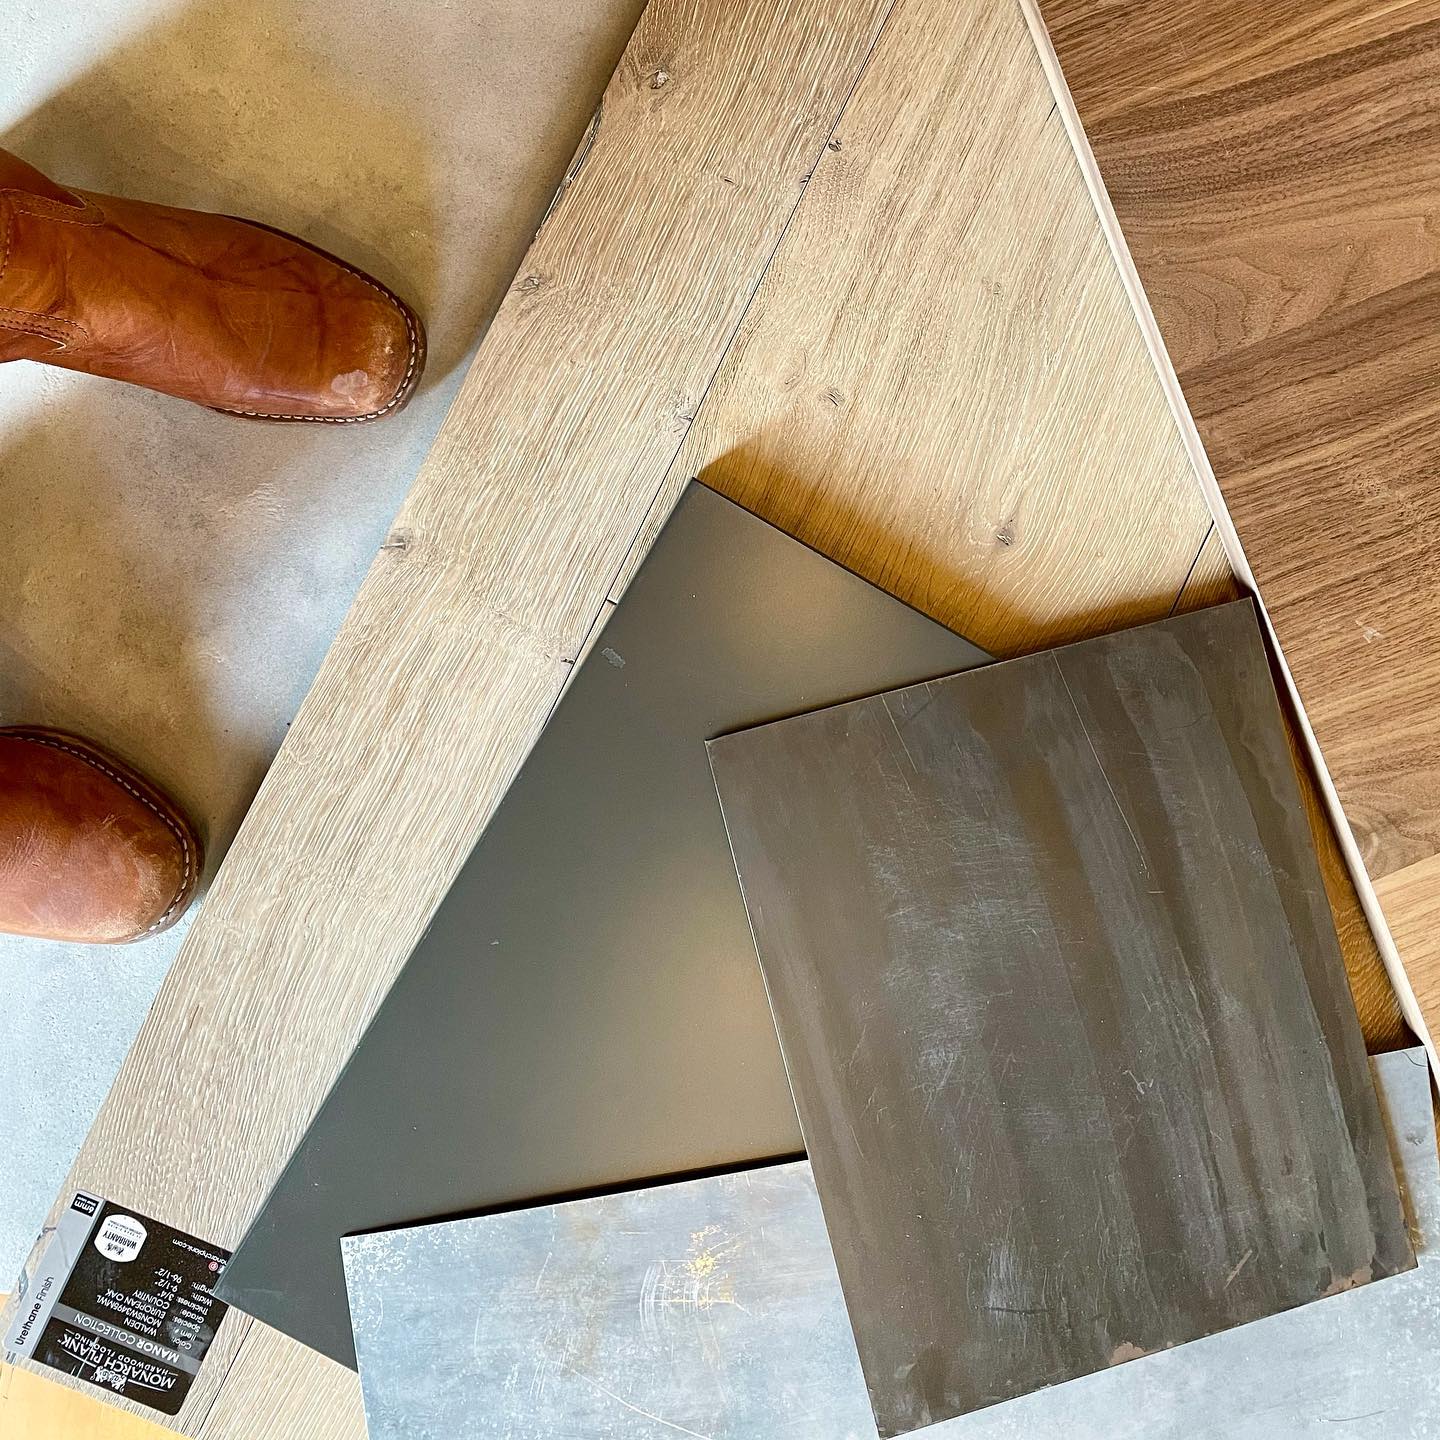 Color pallet of the day...whitewashed oak flooring, iron ore and rustic walnut cabinets, gun-blued steel hood, zinc countertops (and Frye boots ) @awiwoodworks @cmtfabrication whitefish custom home builder